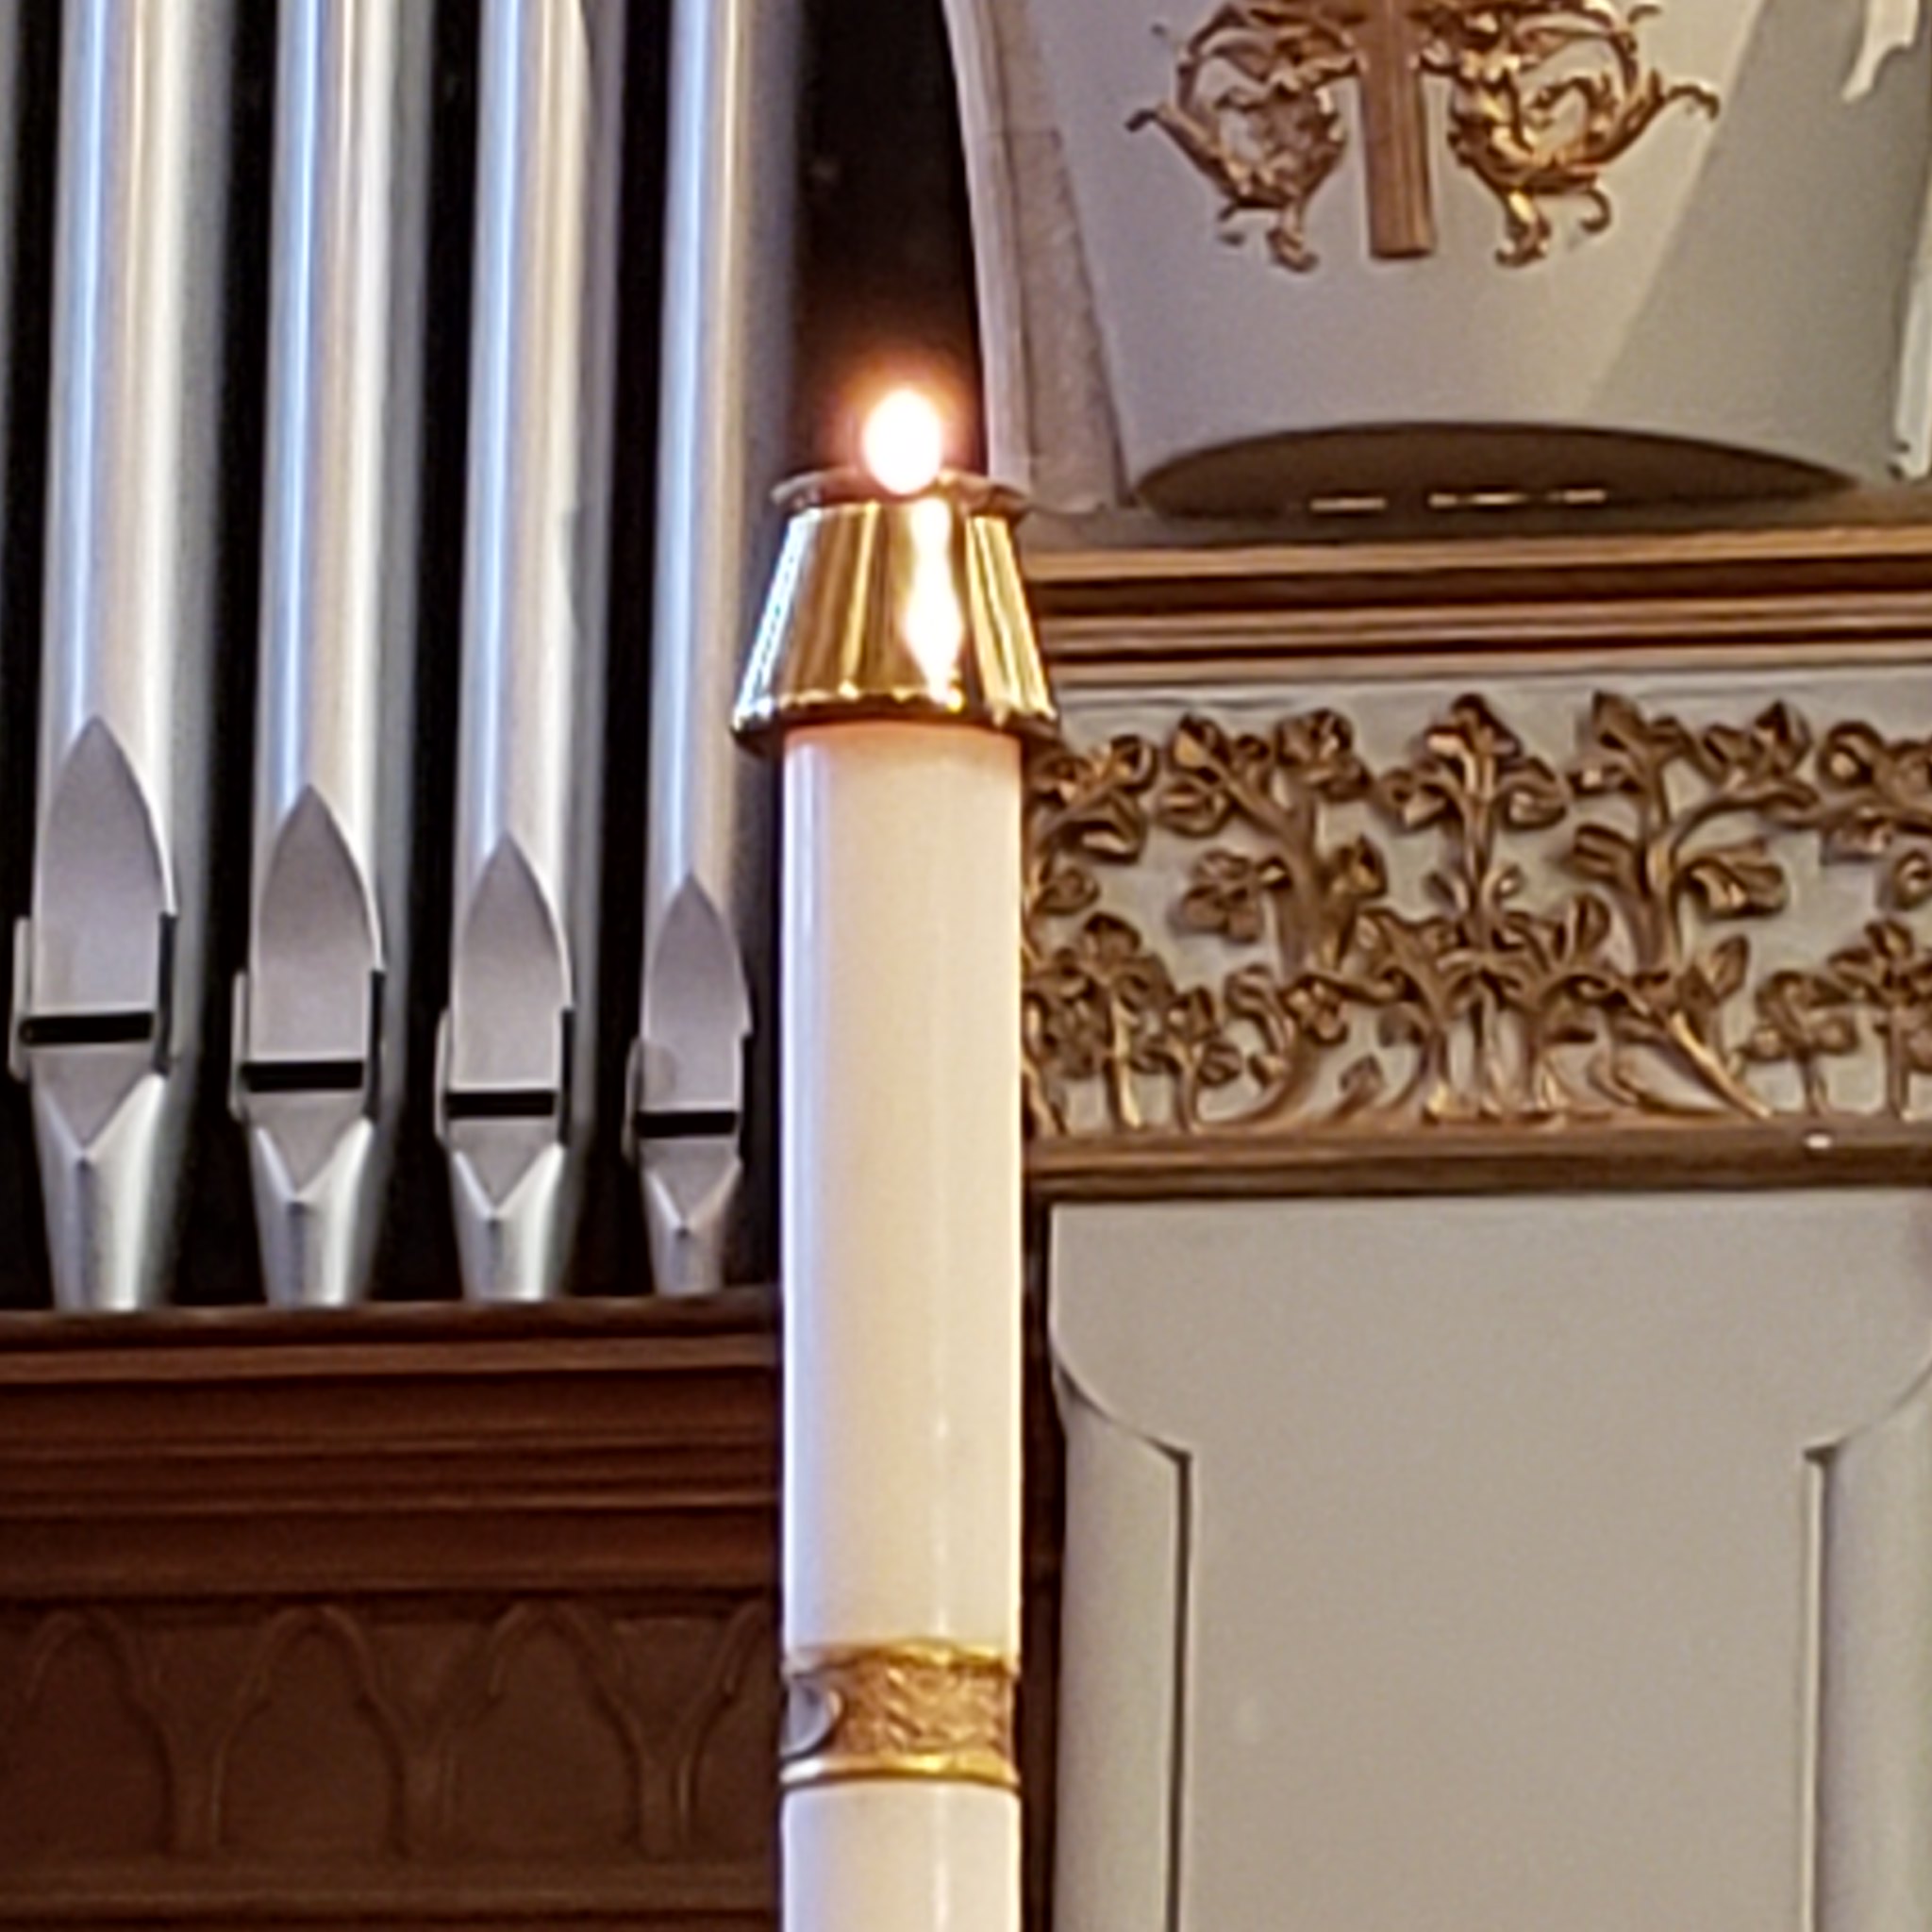 The Paschal candle. (Photo: jofo2005/ Flickr)